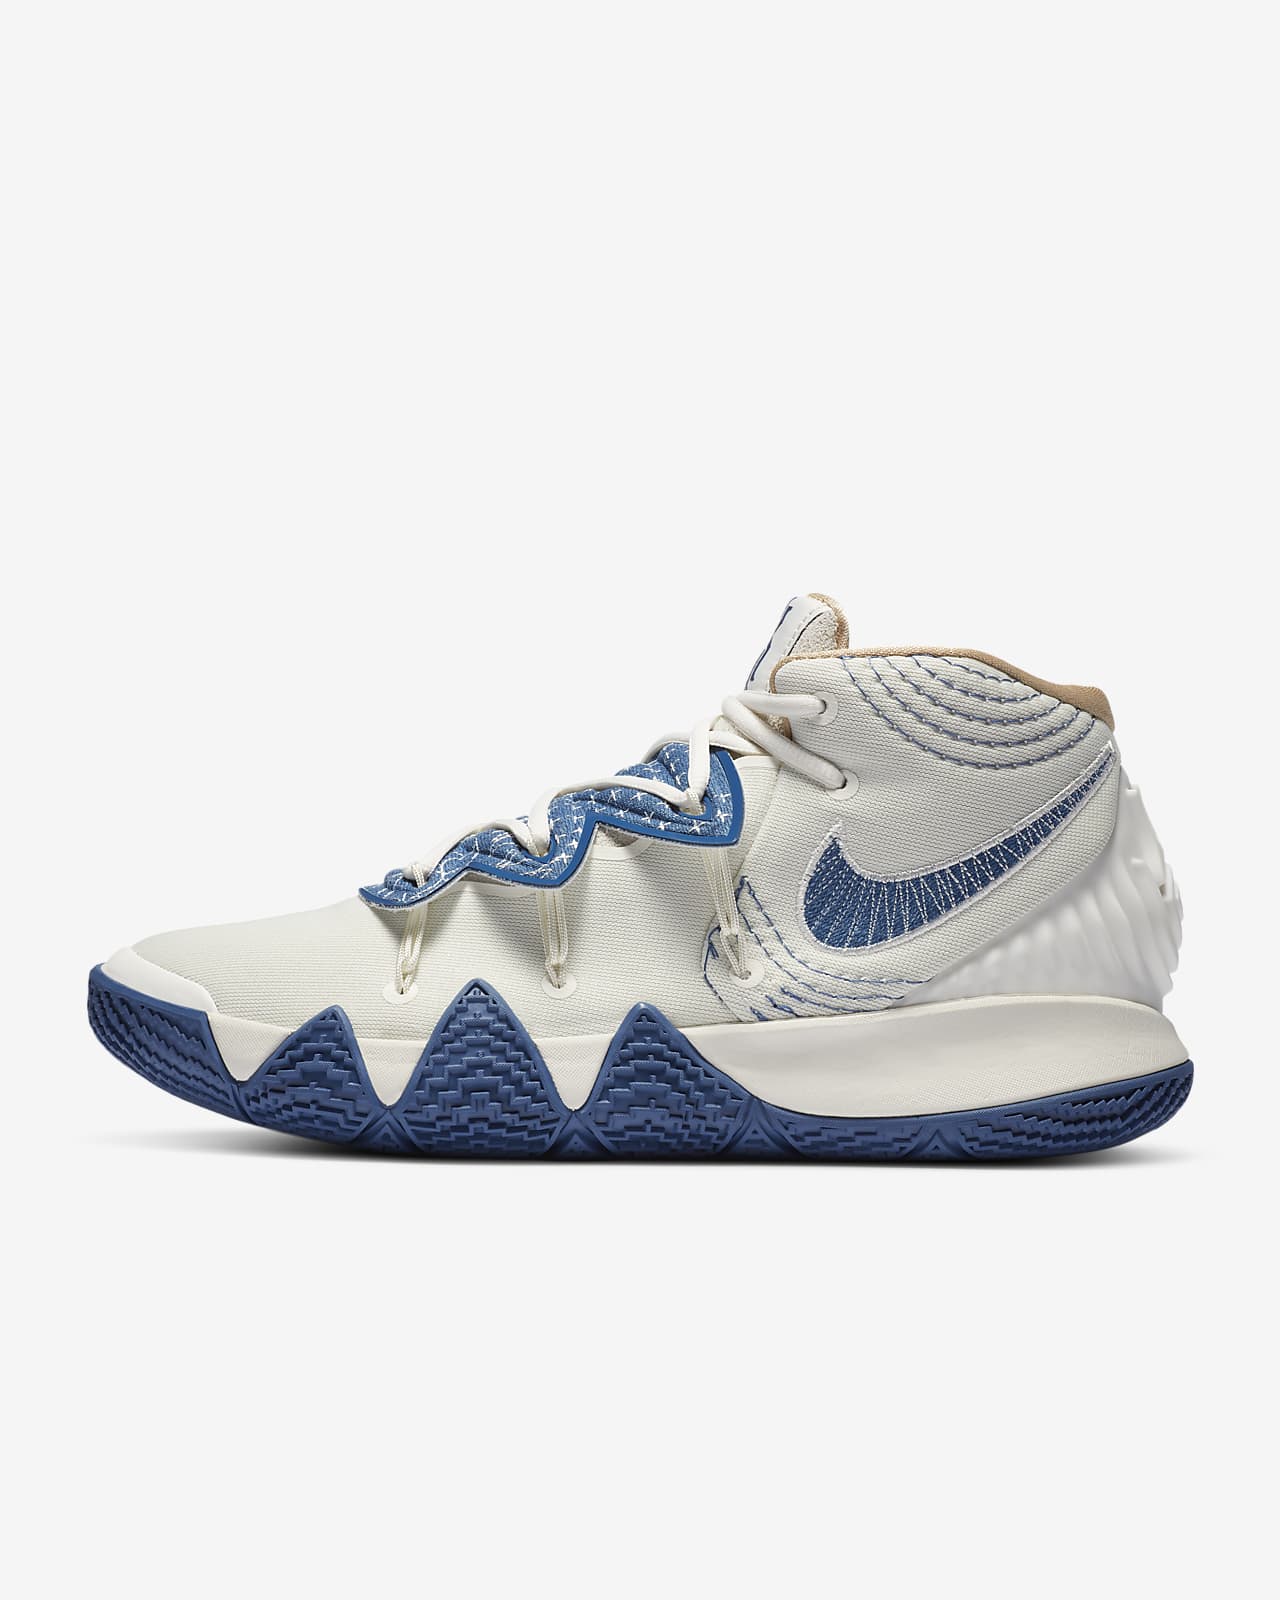 cool looking basketball shoes